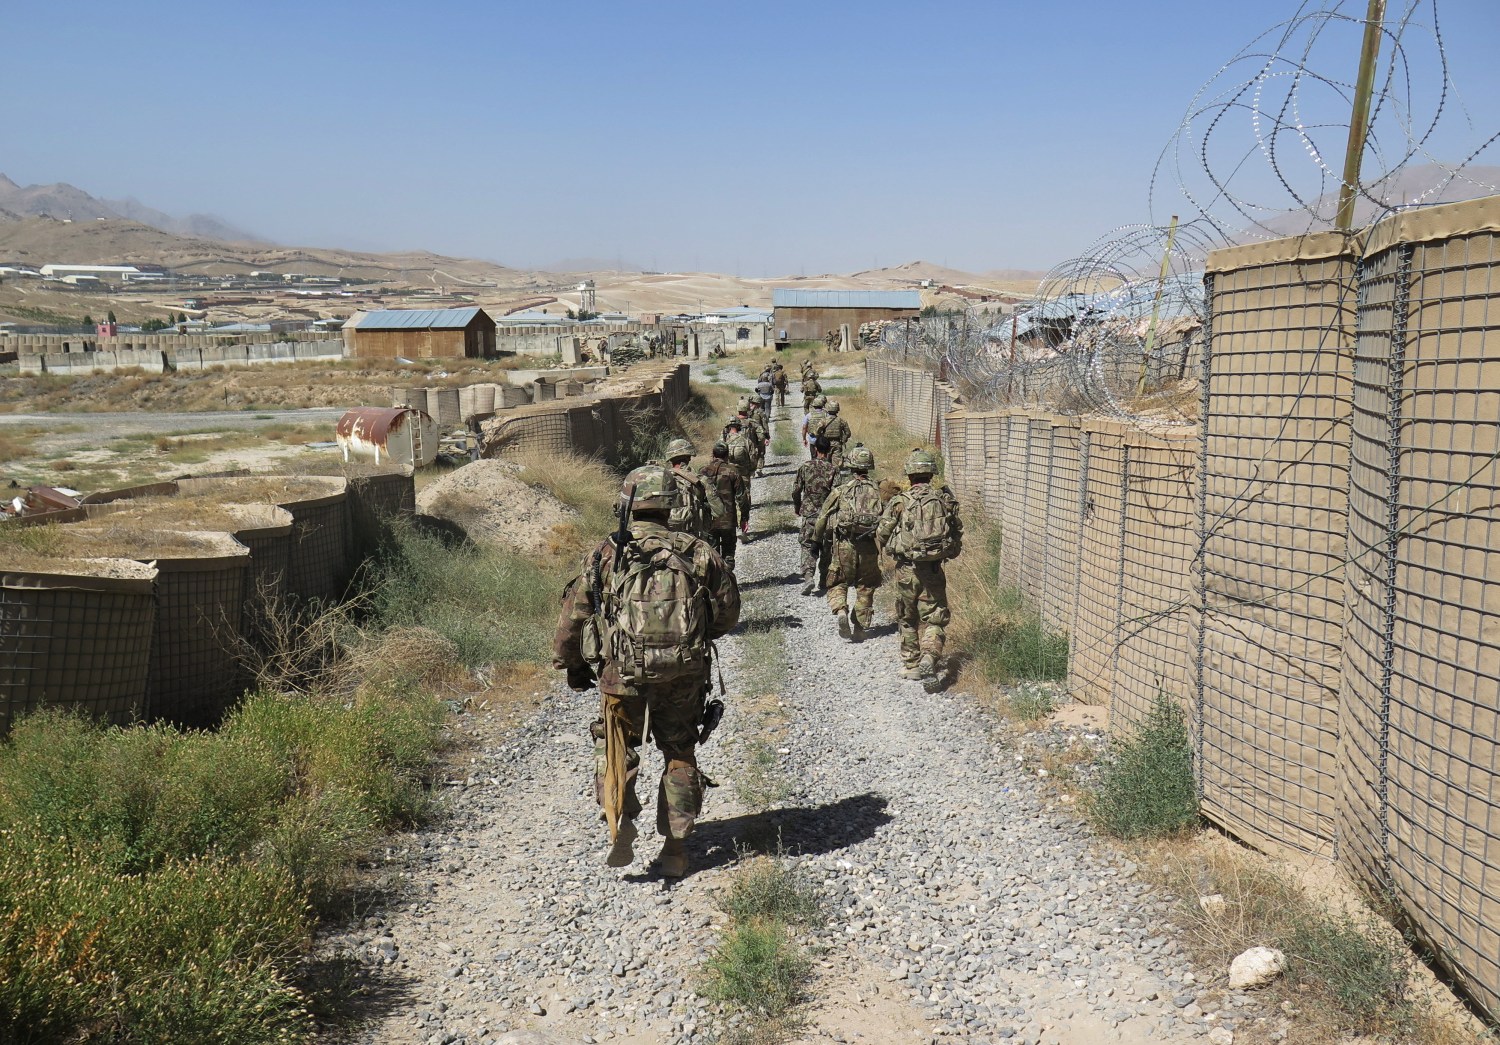 U.S. military advisers from the 1st Security Force Assistance Brigade walk at an Afghan National Army base in Maidan Wardak province, Afghanistan August 6, 2018. Picture taken August 6, 2018. REUTERS/James Mackenzie